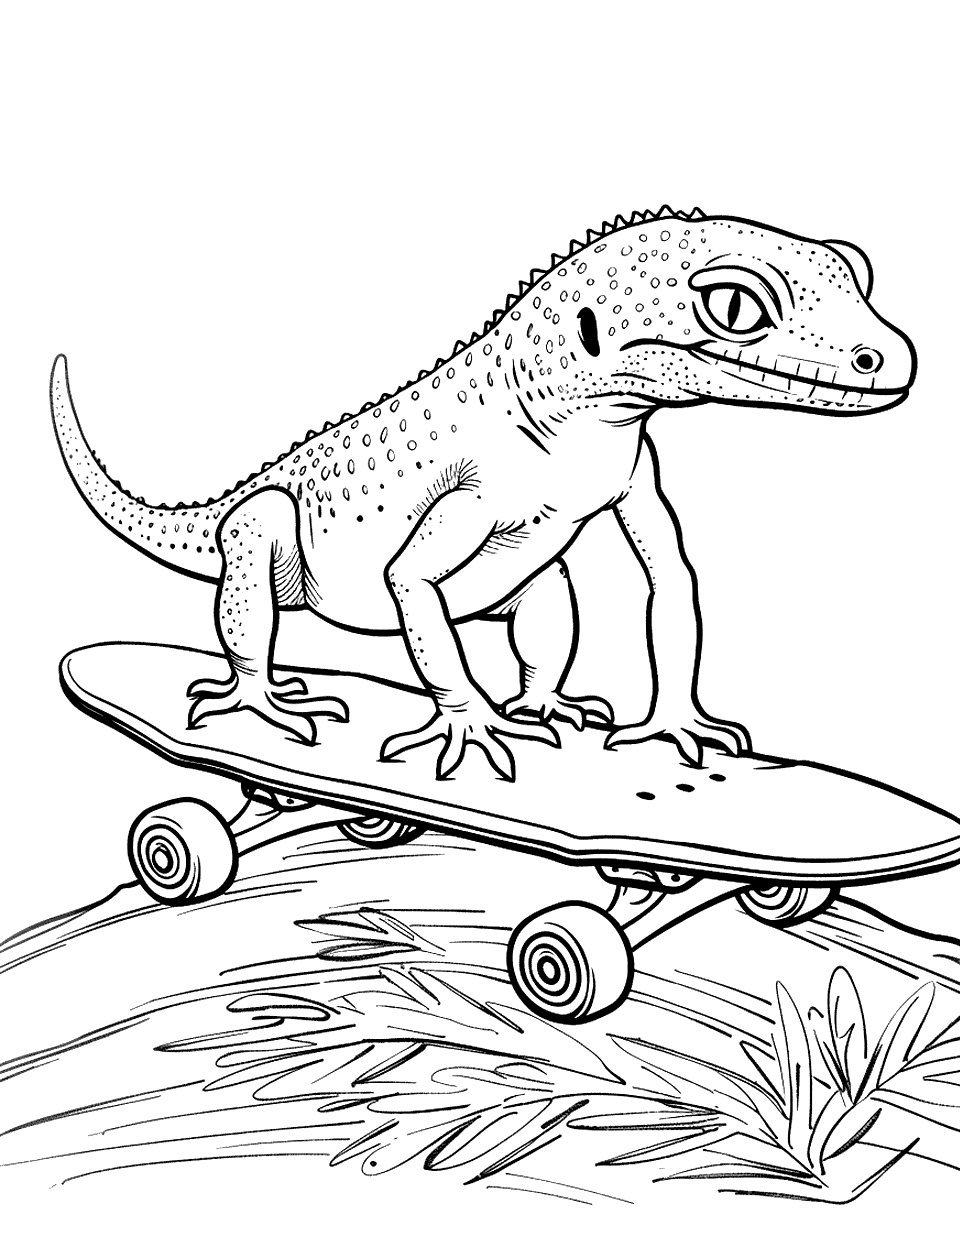 Leopard Gecko on a Skateboard Lizard Coloring Page - A leopard gecko standing on a skateboard, ready to roll down a small hill.